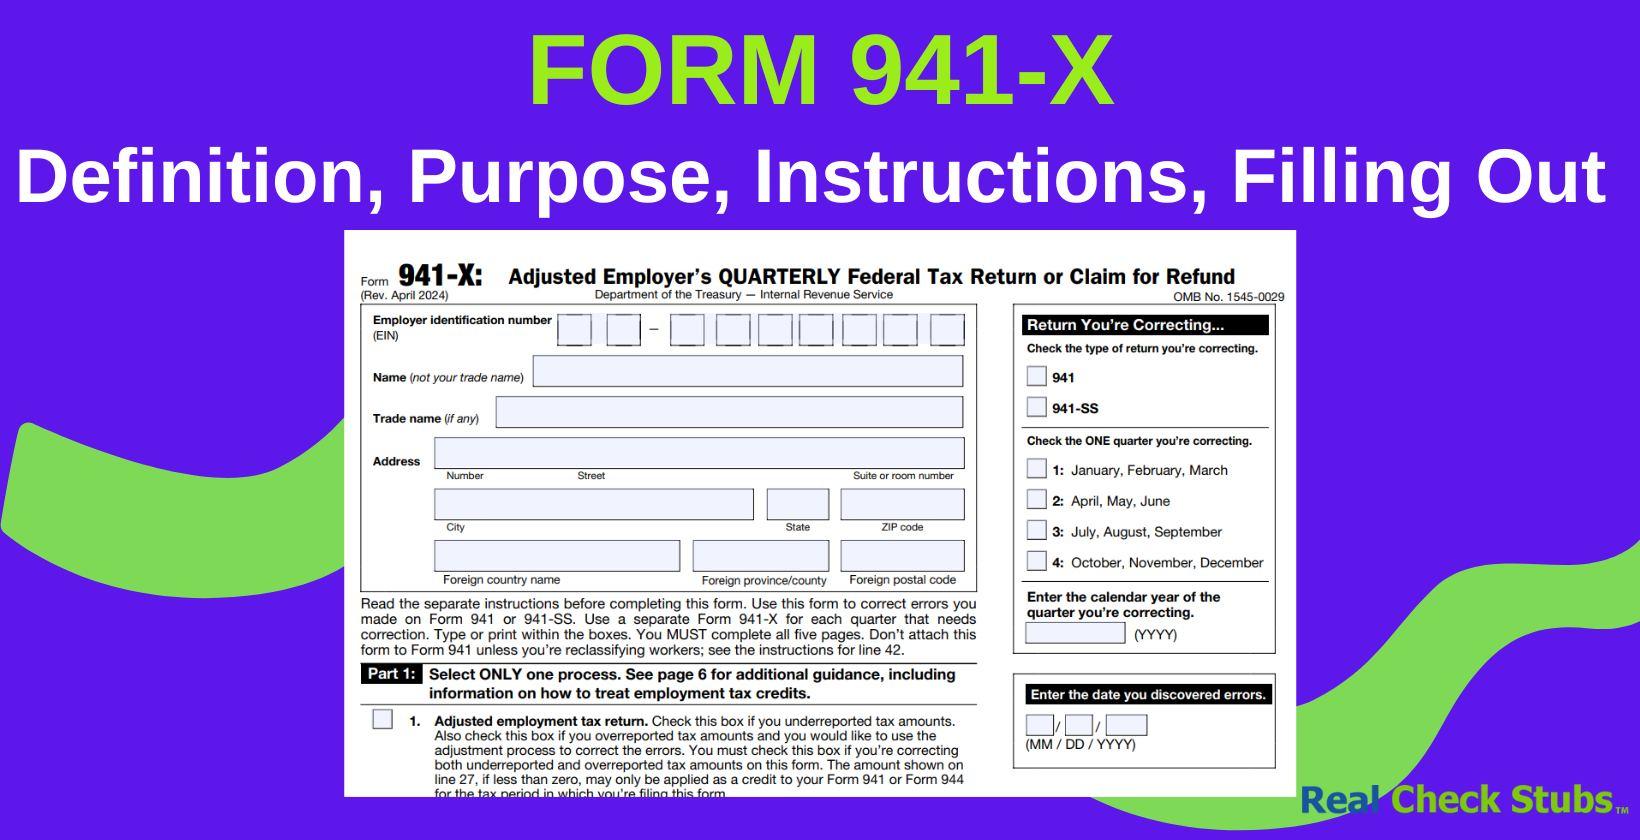 Form 941 X: Instructions, Purpose, Complete, File